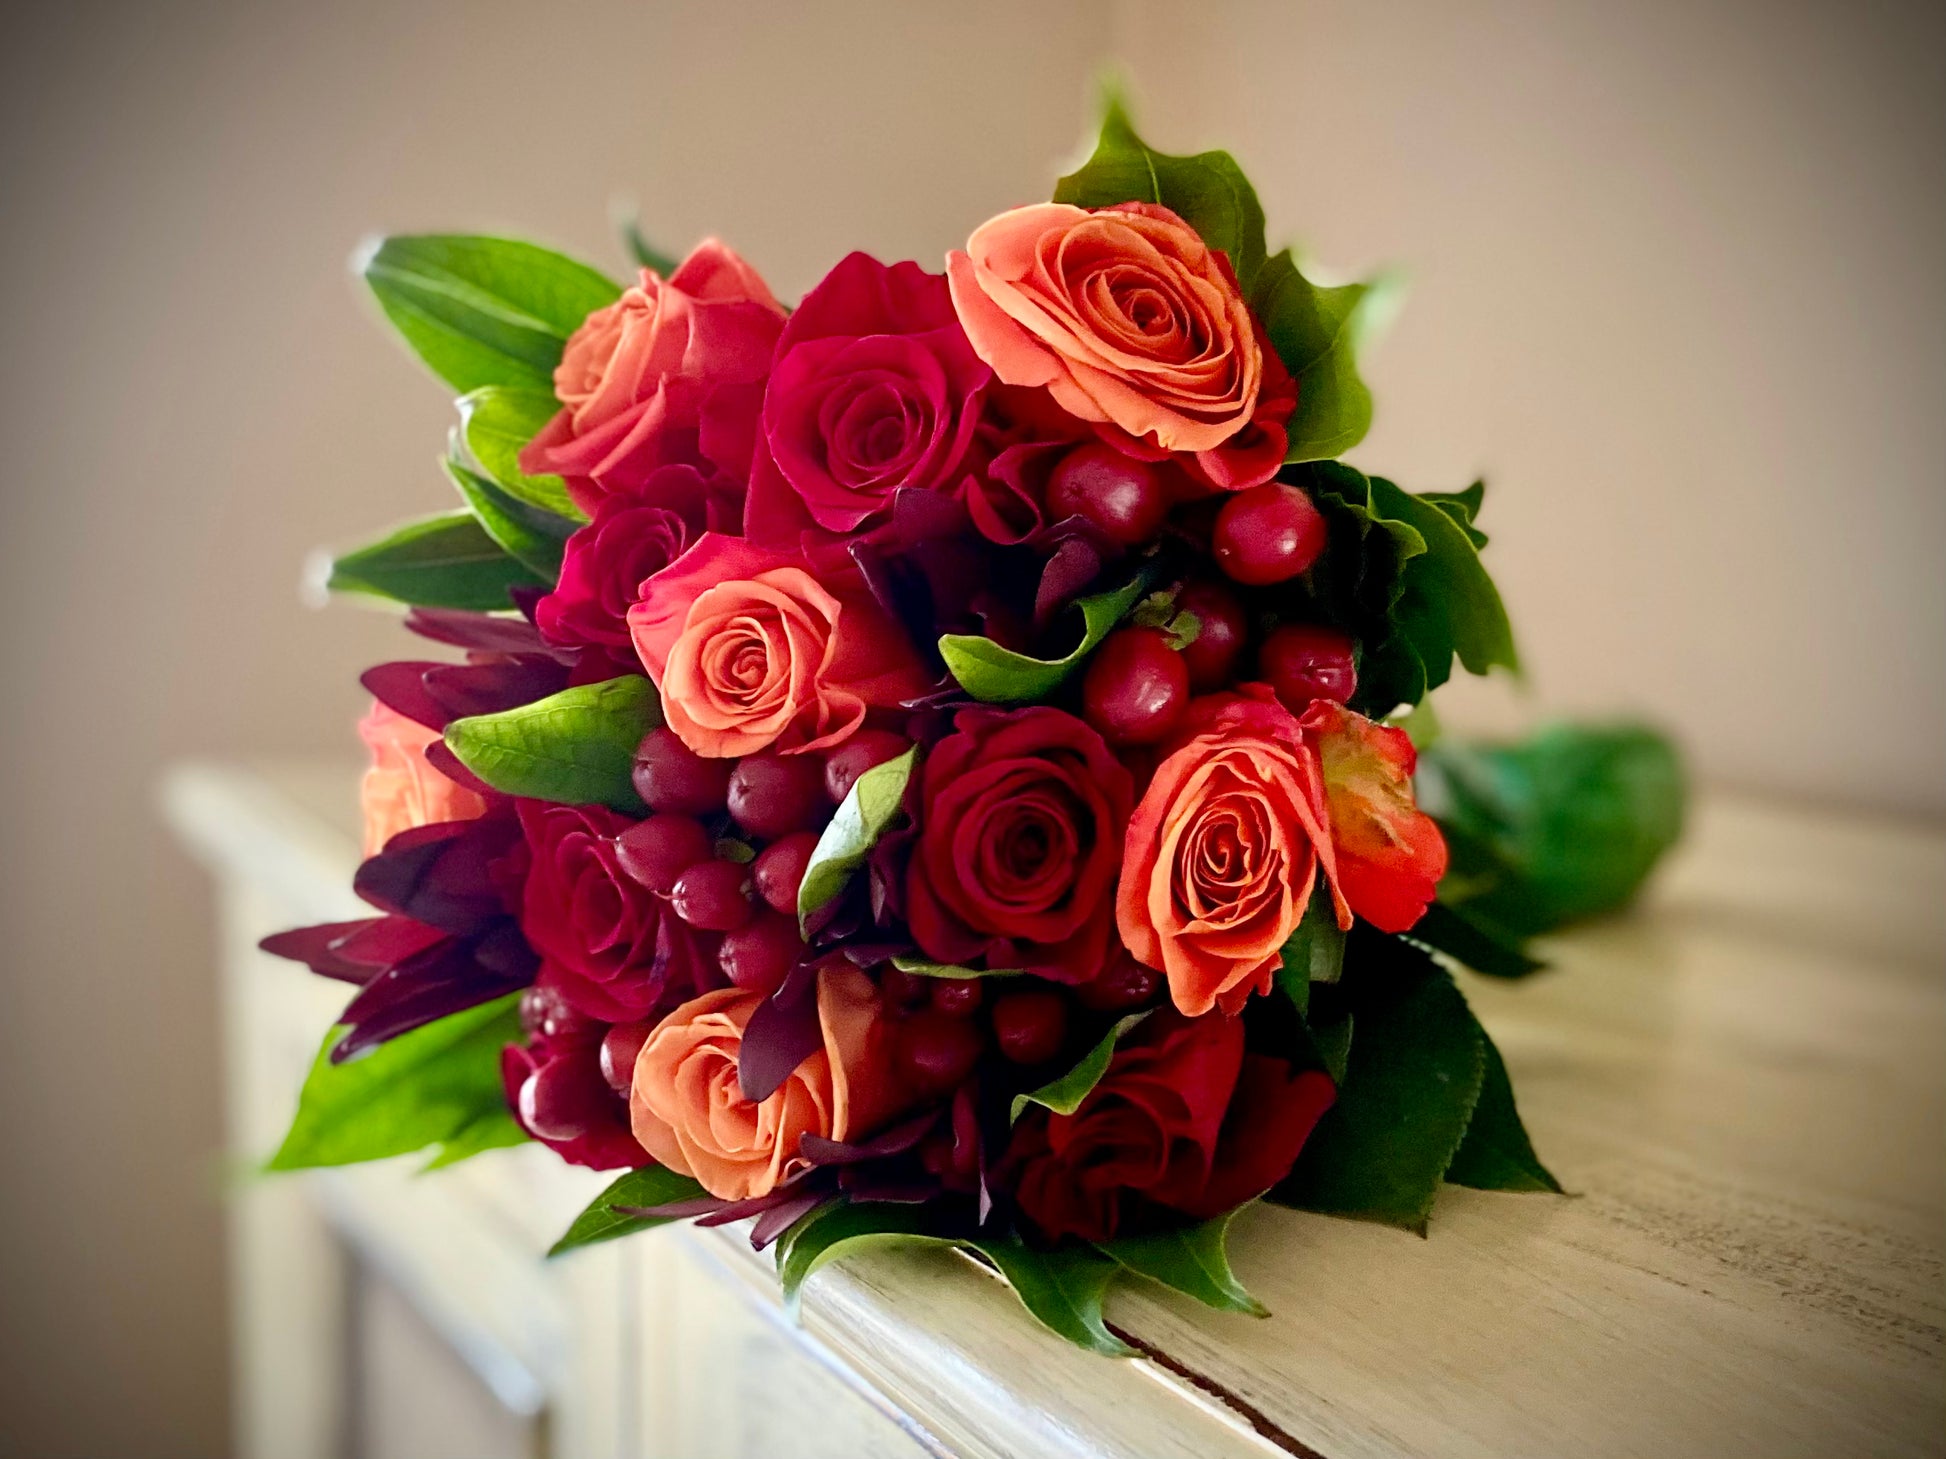 Close-up view of Harvest Dreams product featuring red and orange roses bouquet on a tabletop